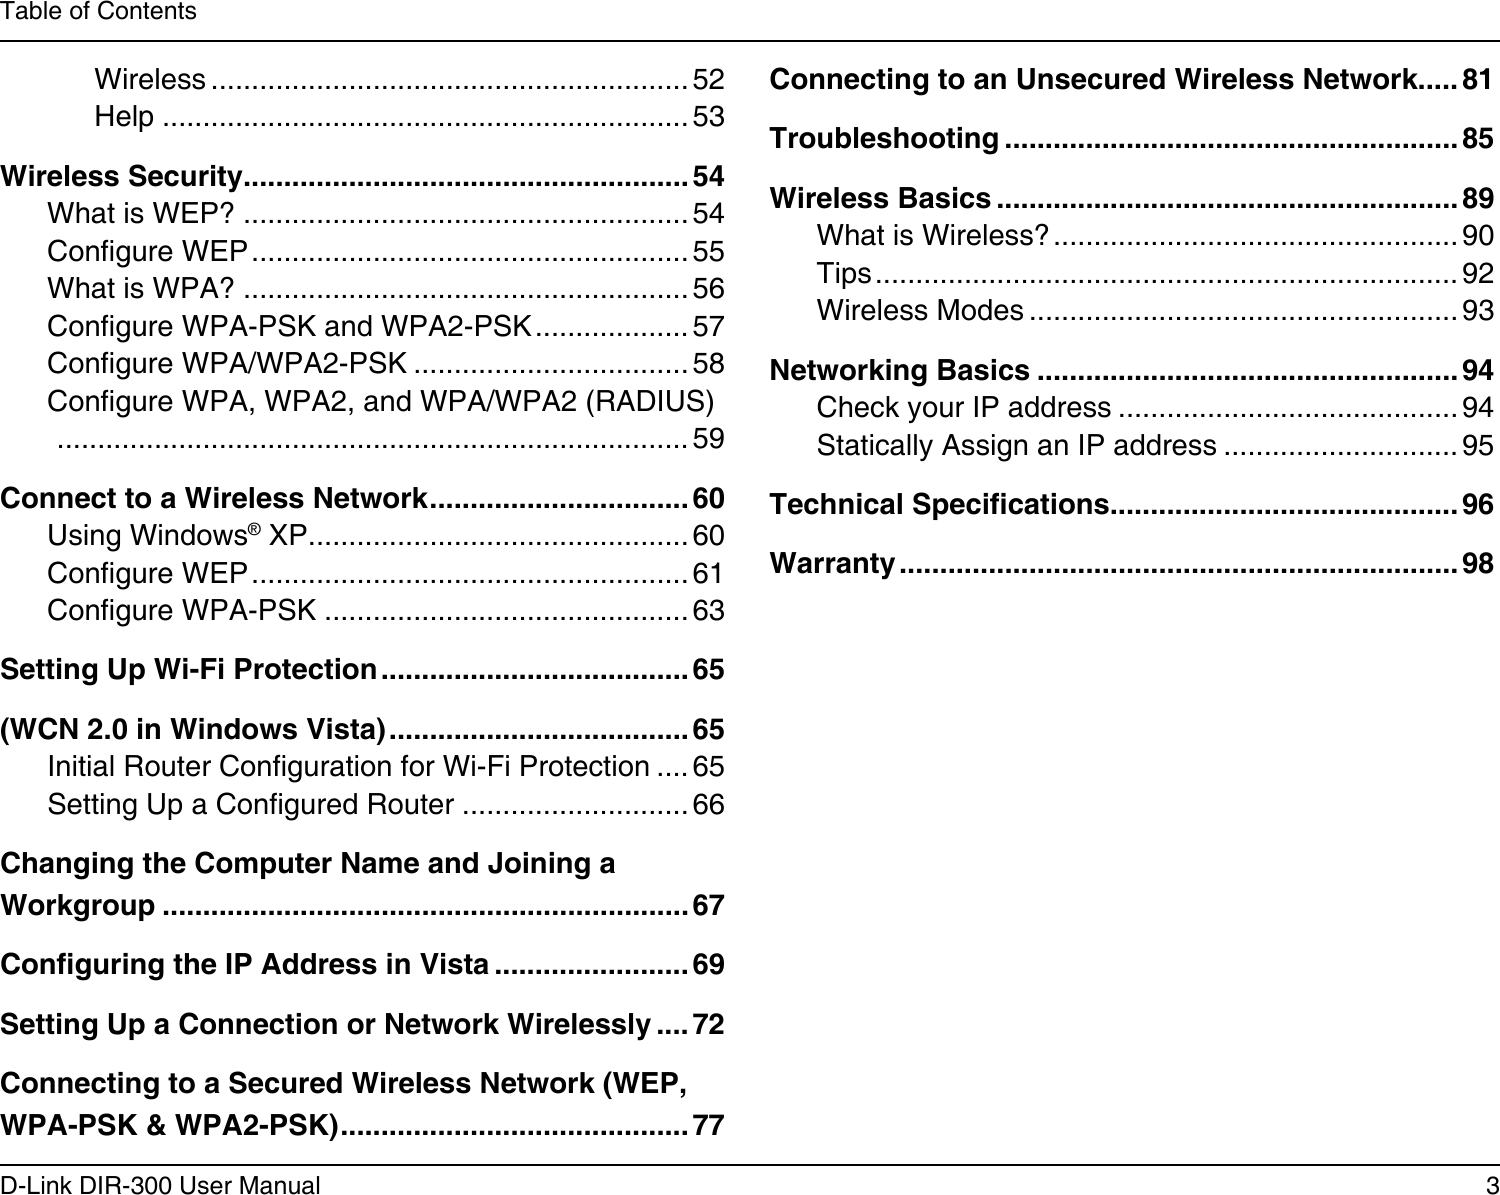 3D-Link DIR-300 User ManualTable of ContentsWireless ........................................................... 52Help ................................................................. 53Wireless Security....................................................... 54What is WEP? .......................................................54Congure WEP ...................................................... 55What is WPA? .......................................................56Congure WPA-PSK and WPA2-PSK ................... 57Congure WPA/WPA2-PSK .................................. 58Congure WPA, WPA2, and WPA/WPA2 (RADIUS)    ..............................................................................59Connect to a Wireless Network ................................ 60Using Windows® XP ............................................... 60Congure WEP ...................................................... 61Congure WPA-PSK .............................................63Setting Up Wi-Fi Protection ...................................... 65(WCN 2.0 in Windows Vista) ..................................... 65Initial Router Conguration for Wi-Fi Protection .... 65Setting Up a Congured Router ............................66Changing the Computer Name and Joining a Workgroup ................................................................. 67Conguring the IP Address in Vista ........................ 69Setting Up a Connection or Network Wirelessly .... 72Connecting to a Secured Wireless Network (WEP, WPA-PSK &amp; WPA2-PSK) ........................................... 77Connecting to an Unsecured Wireless Network..... 81Troubleshooting ........................................................ 85Wireless Basics ......................................................... 89What is Wireless? .................................................. 90Tips ........................................................................ 92Wireless Modes ..................................................... 93Networking Basics ....................................................94Check your IP address .......................................... 94Statically Assign an IP address ............................. 95Technical Specications........................................... 96Warranty .....................................................................98